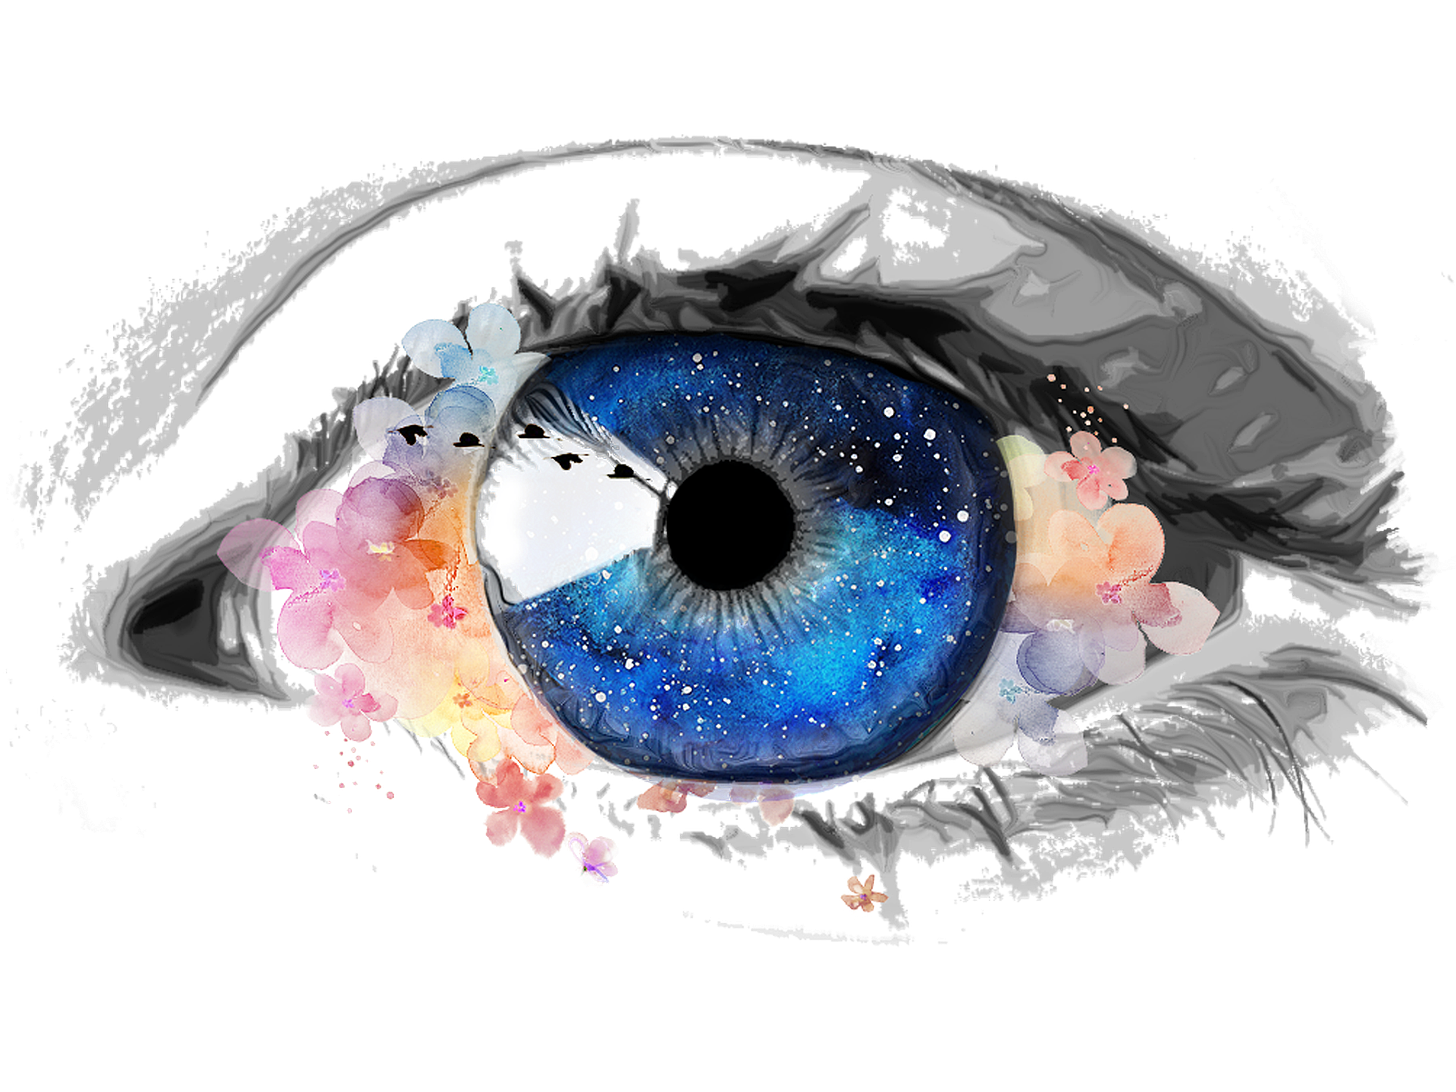 eye, creative, galaxy, collage, flowers, paint, artistic, birds, lash, design, colorful, color, surreal, soul, window, spirit, life, beauty, universe, cosmos,  illustrations,